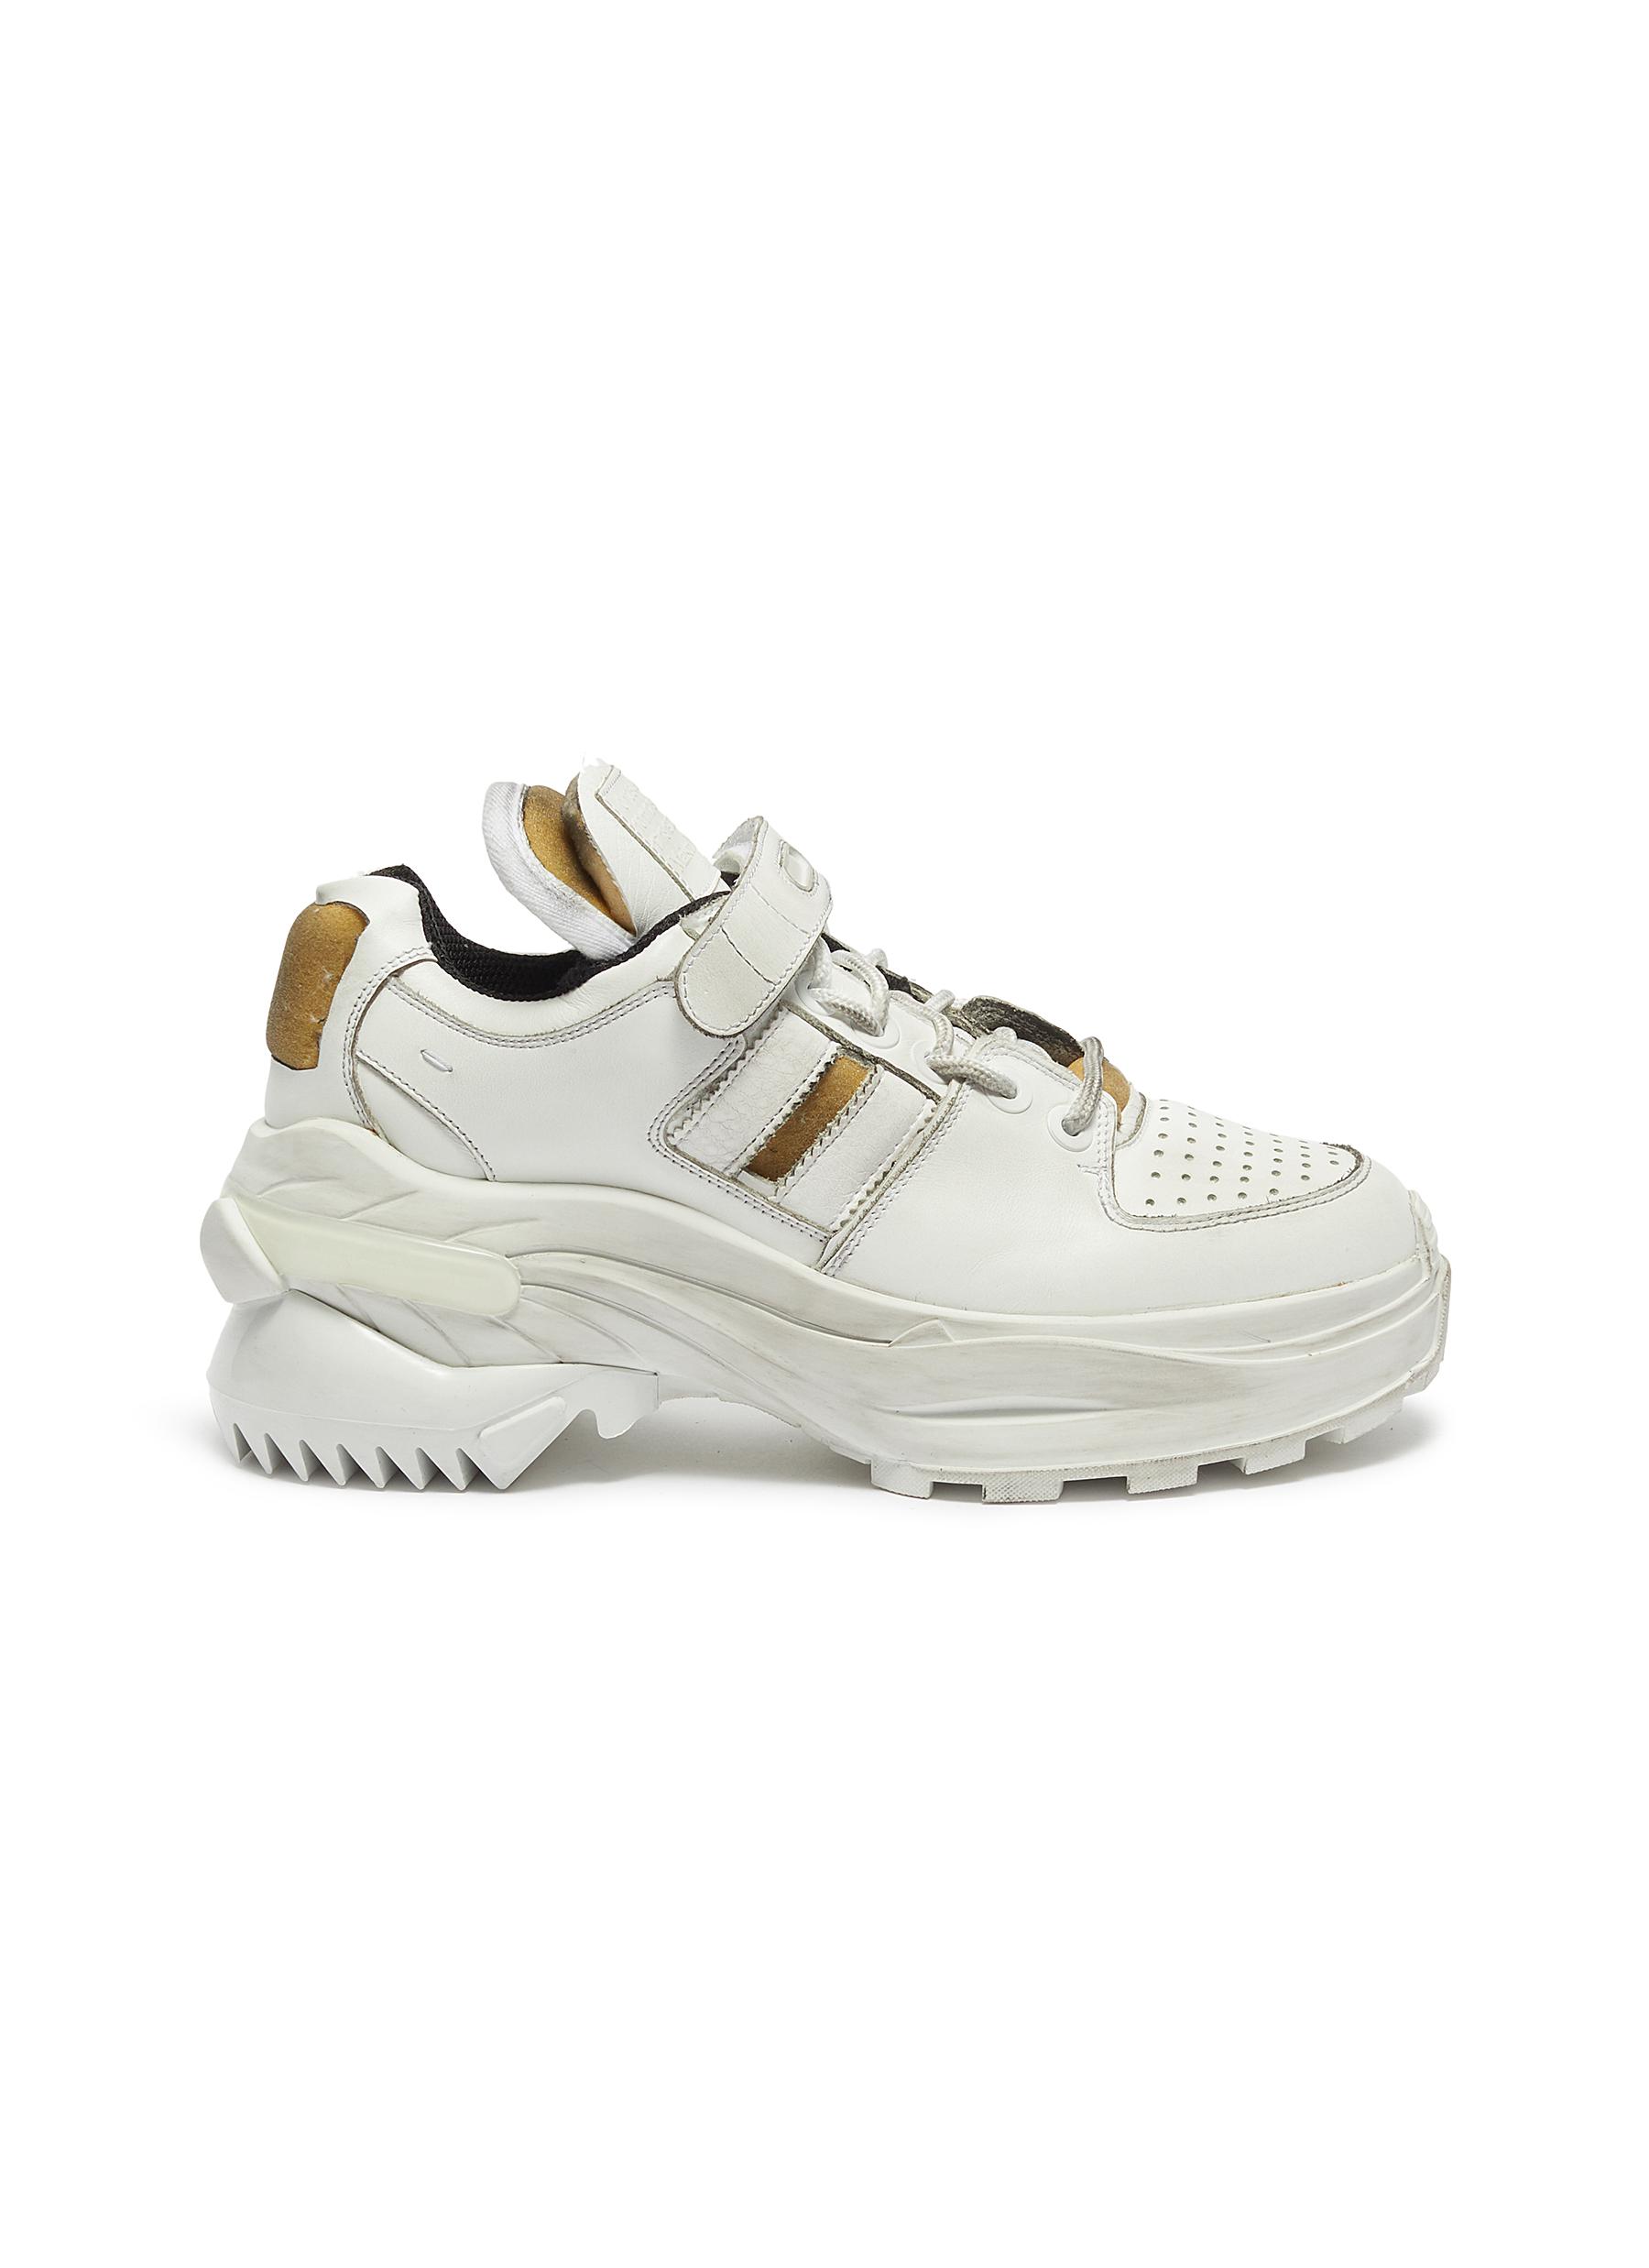 Retro Fit chunky outsole cutout leather sneakers by Maison Margiela ...